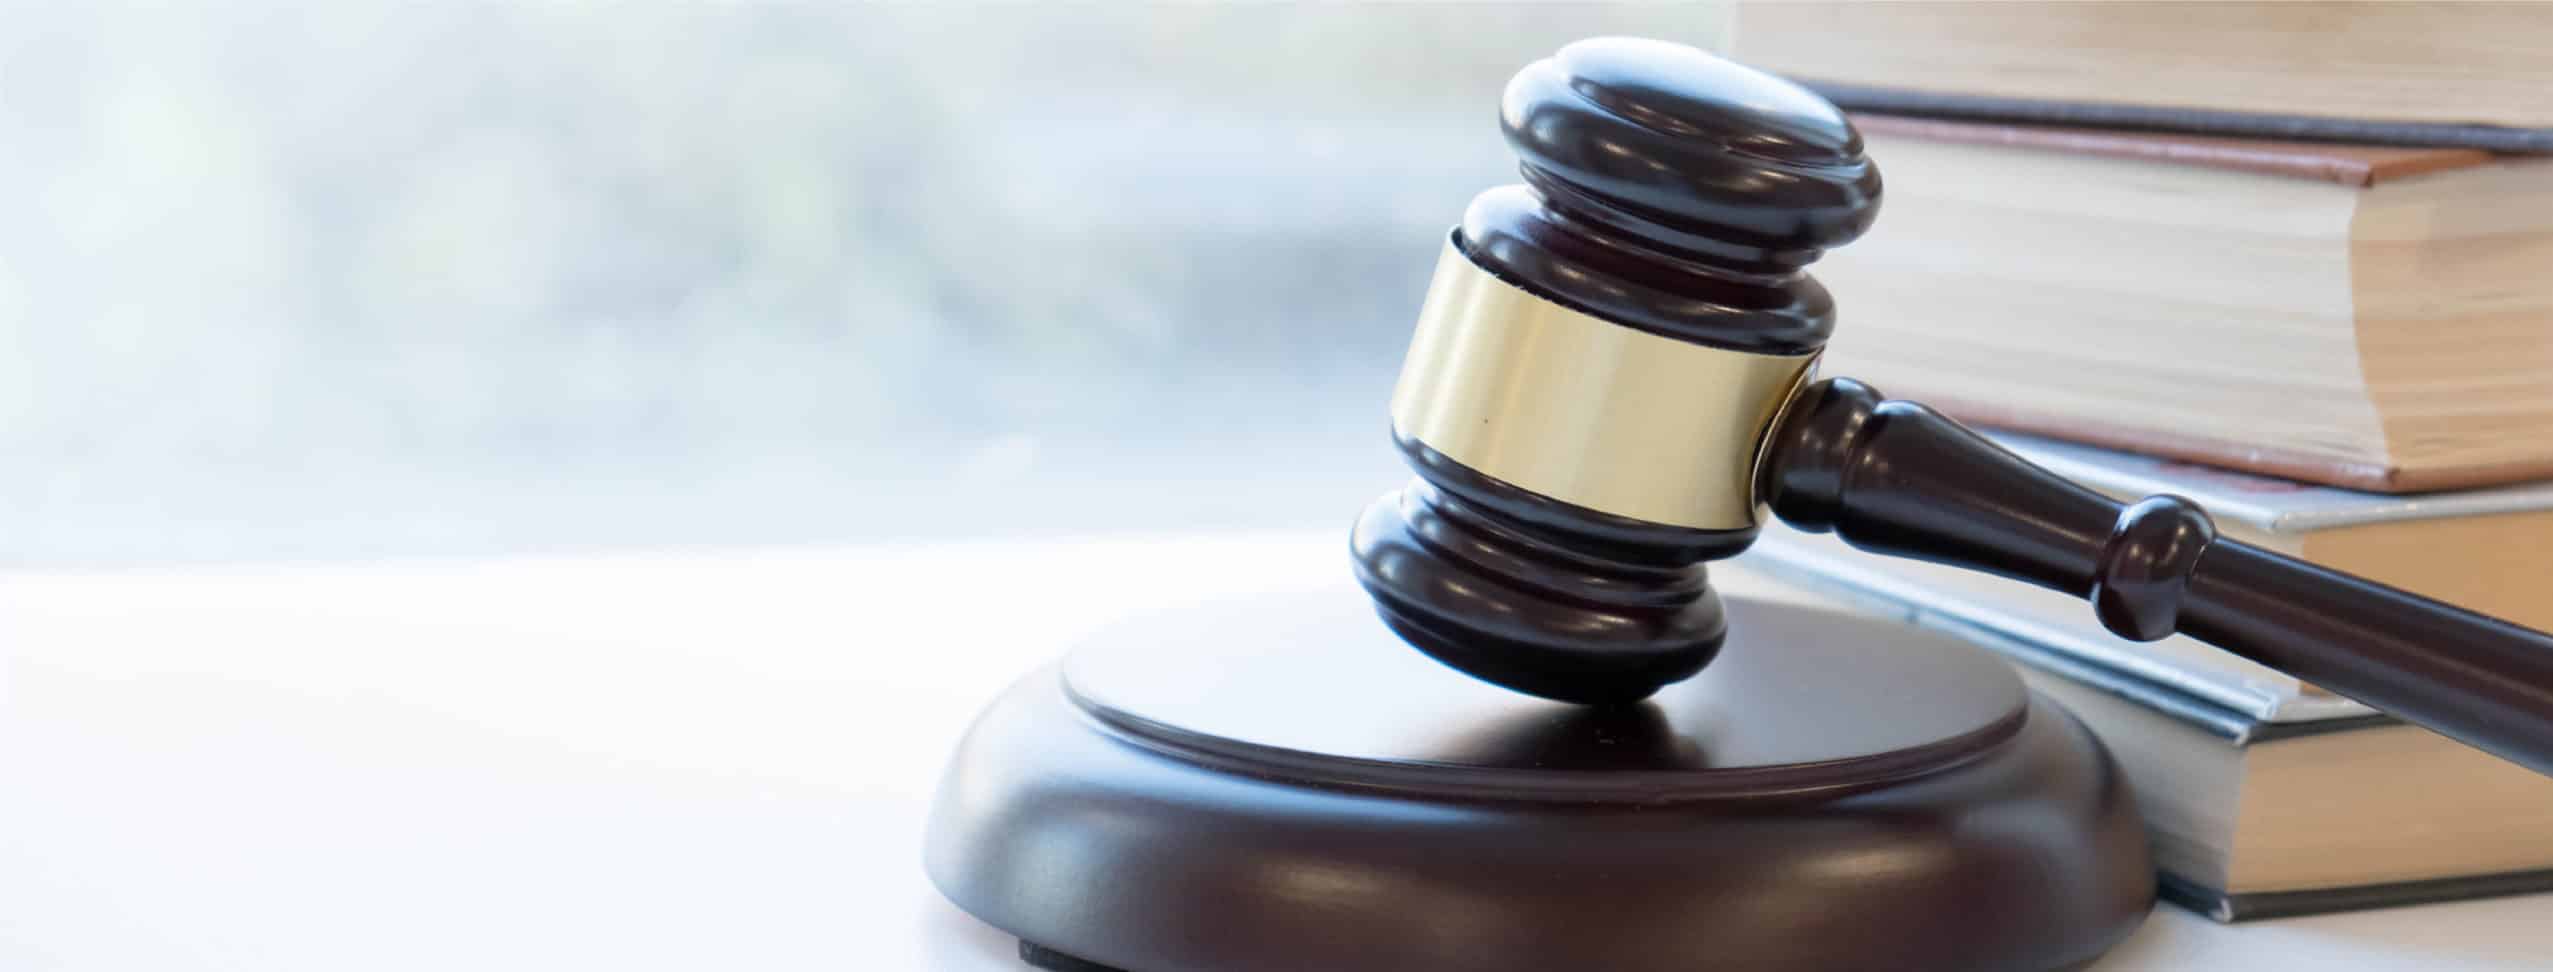 Image of a gavel on PSA Financial's website